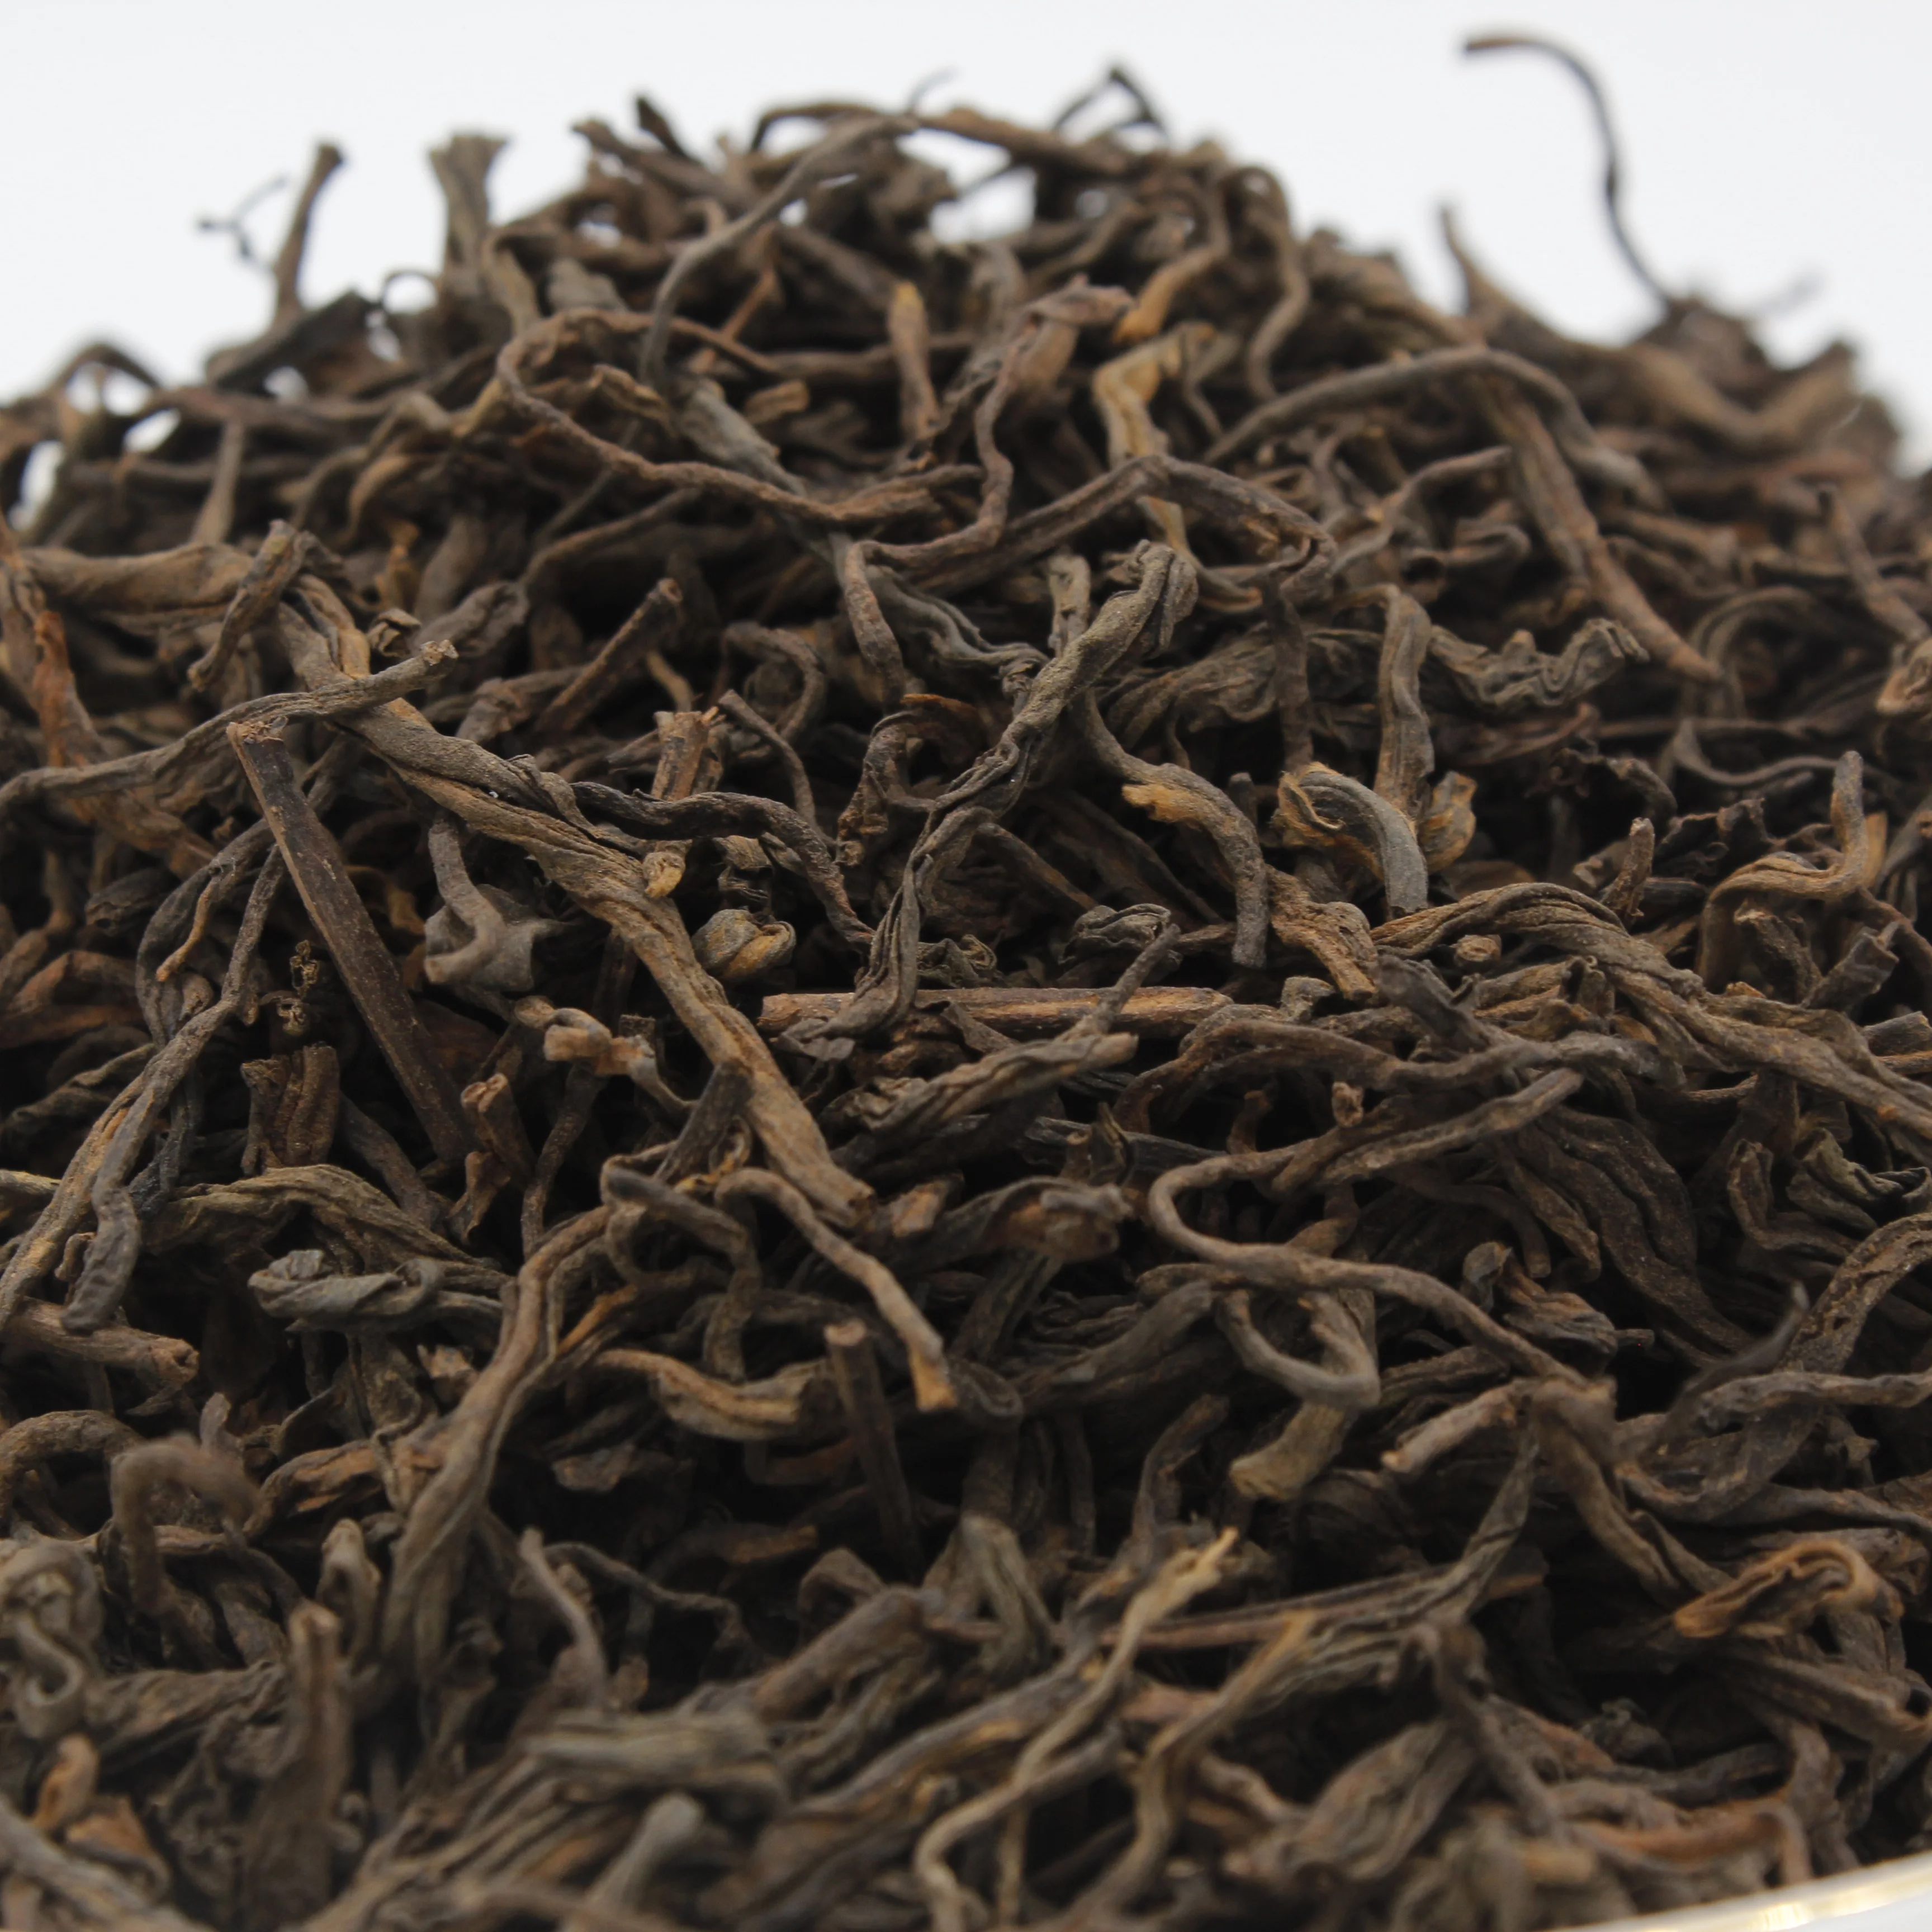 SLP02-2 detoxifying and delicious weight loss tea for daily drink and gift yunnan Ripe Puerh Tea